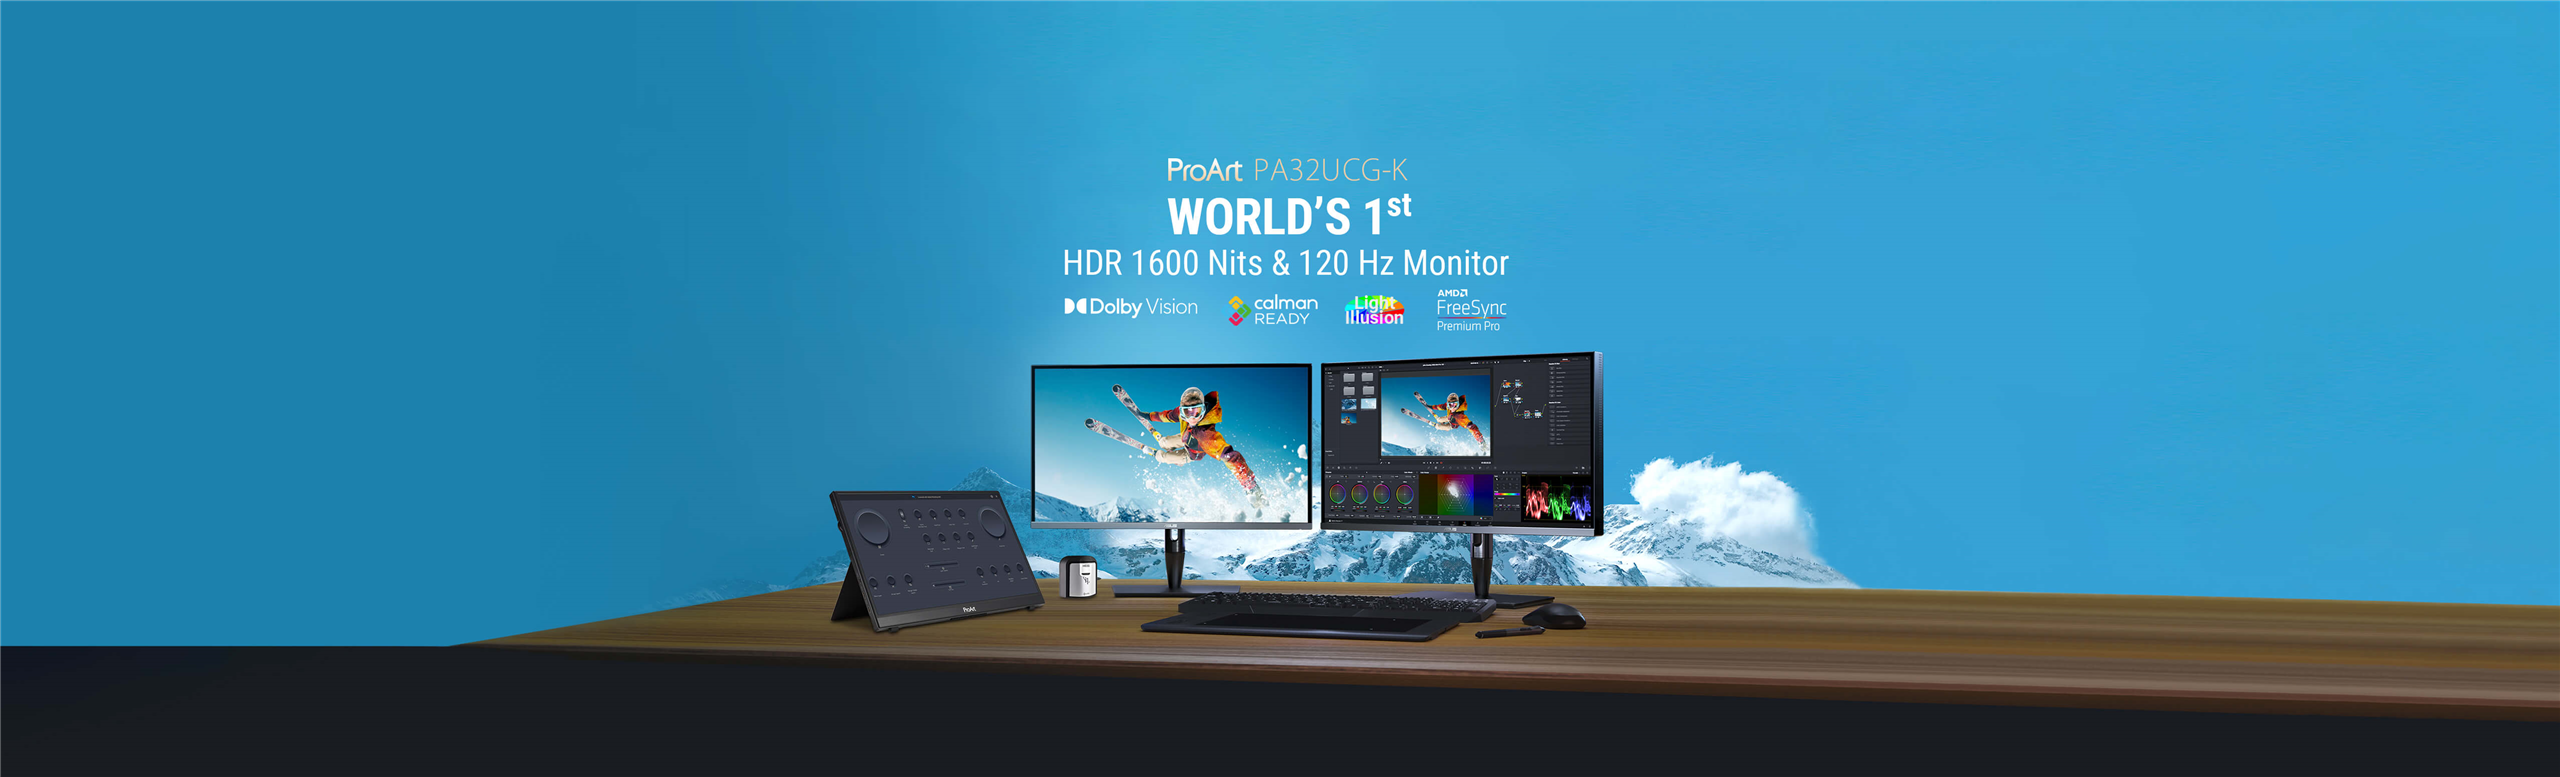 ProArt PA32UCG-K World's 1st HDR 1600 Nits & 120 HZ Monitor 2 Monitor, a kehboard, a mouse and a tablet on desk